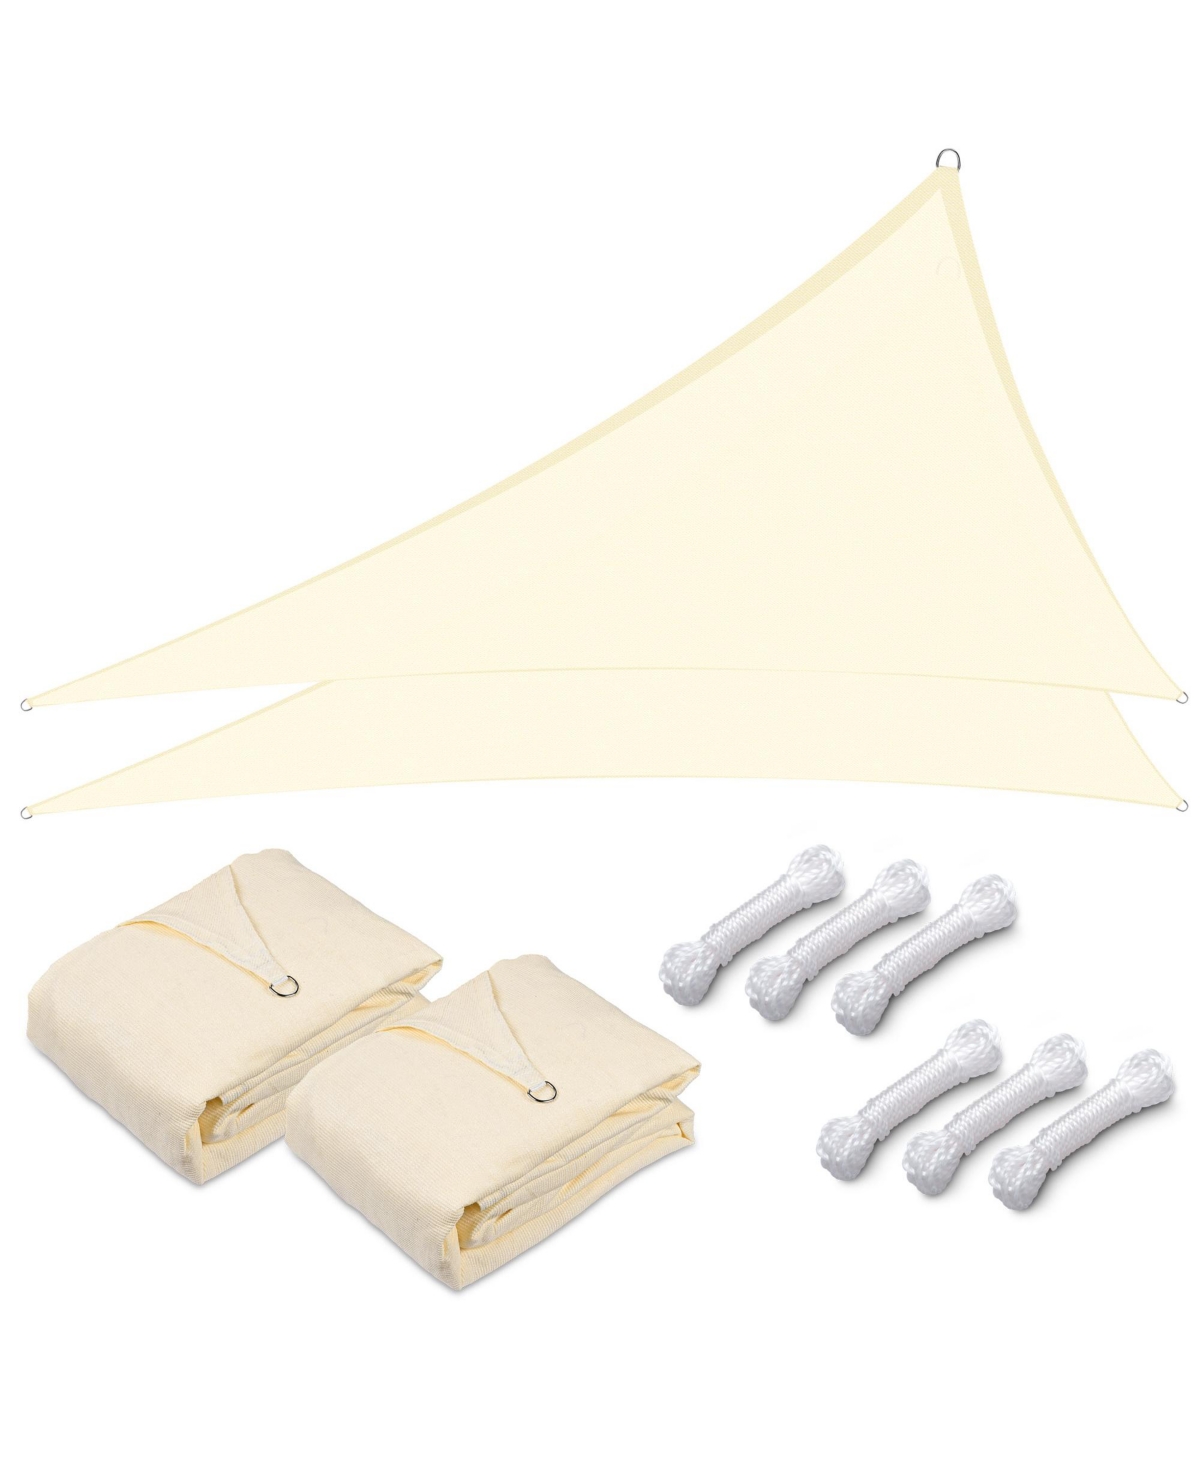 2 Pack 16 Ft 97% Uv Block Triangle Sun Shade Sail Canopy Outdoor Patio Garden - Off white